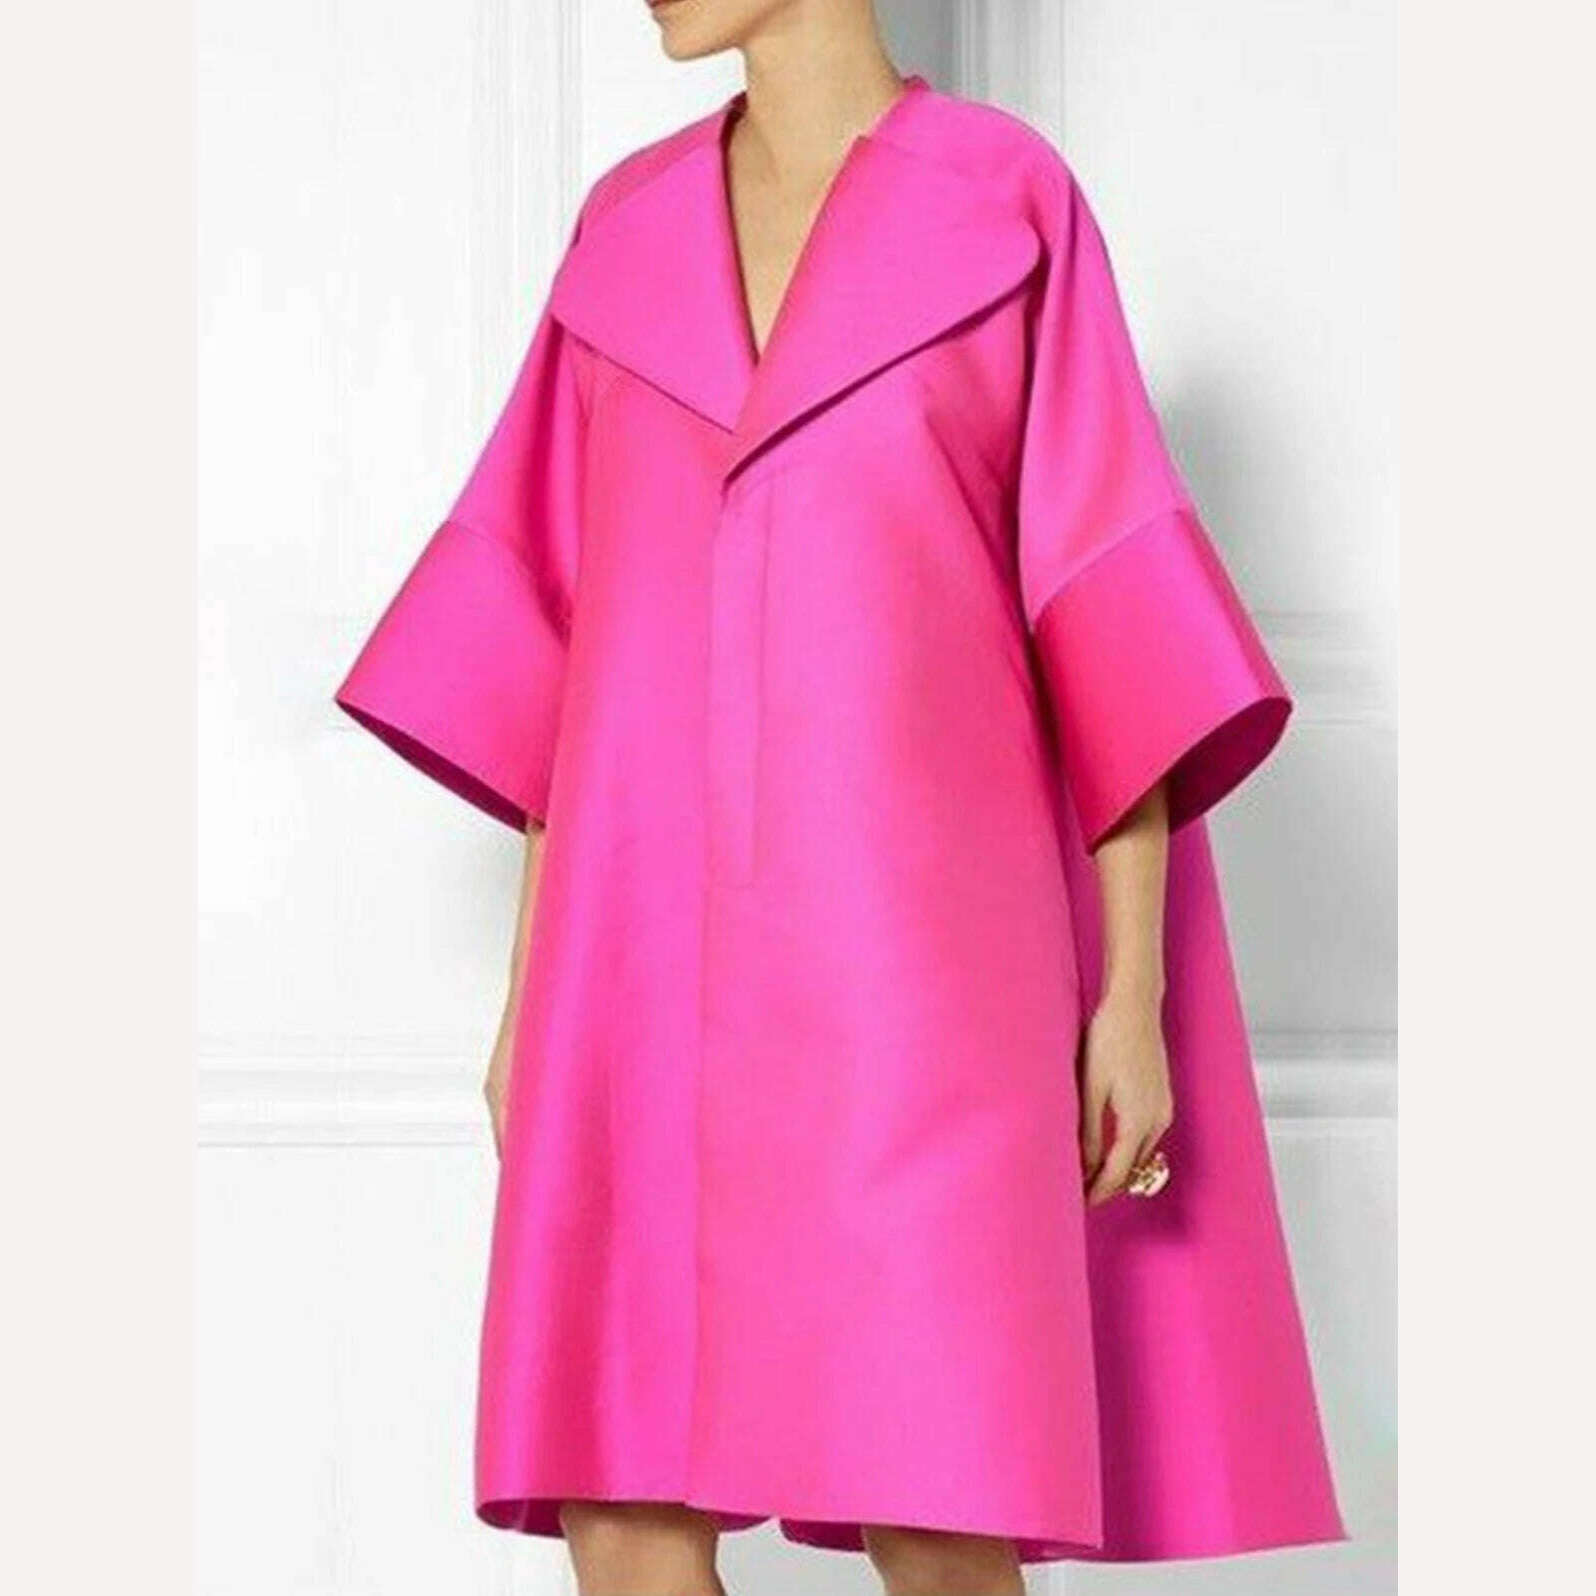 KIMLUD, Vintage Dress Women Clothing Spring Summer Half Sleeve Loose Dresses Casual Chic Lapel Tunicas Midi Pink Dress, Pink / 4XL / CHINA, KIMLUD APPAREL - Womens Clothes